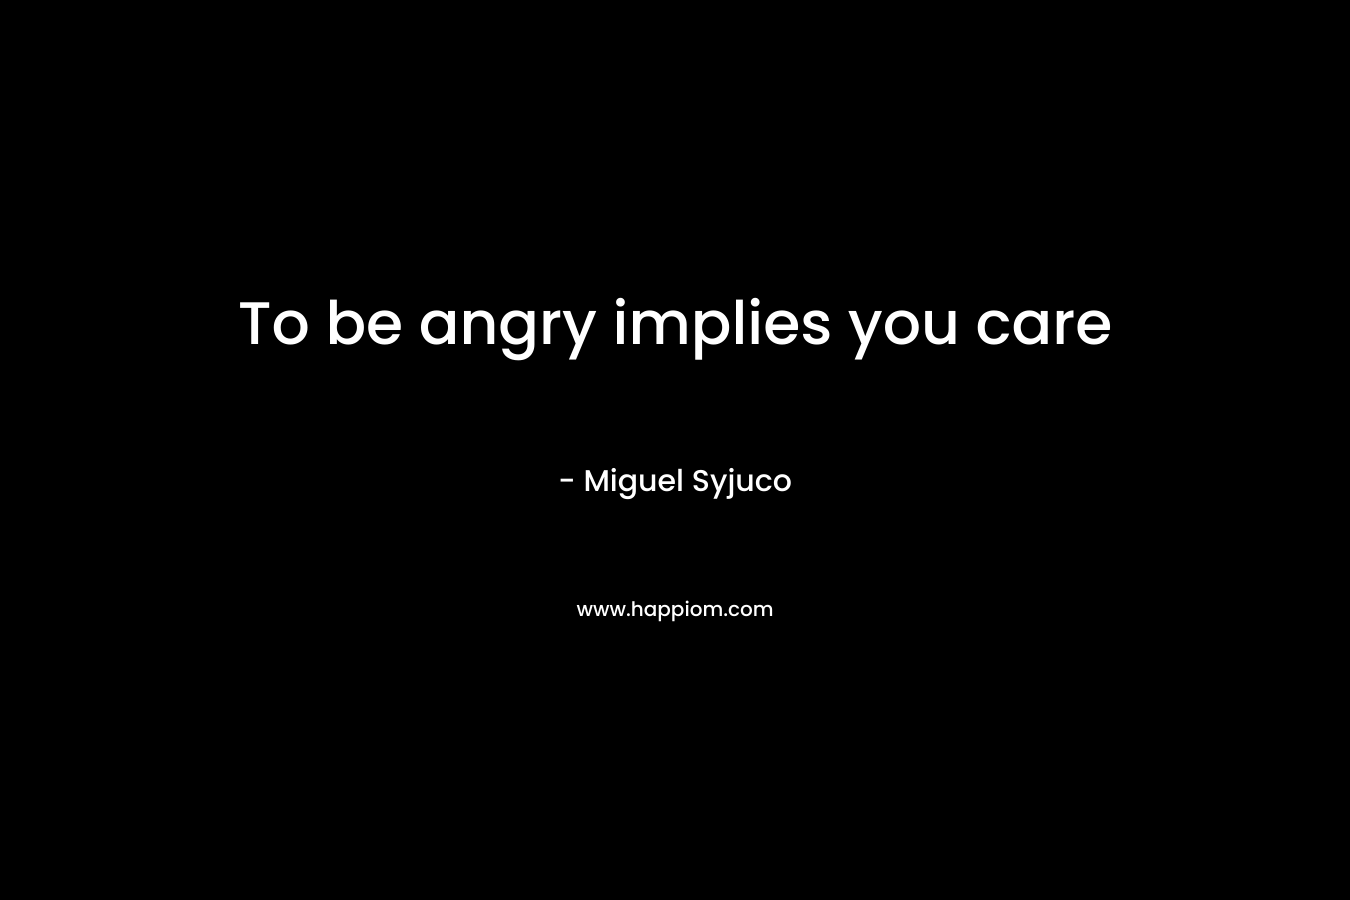 To be angry implies you care